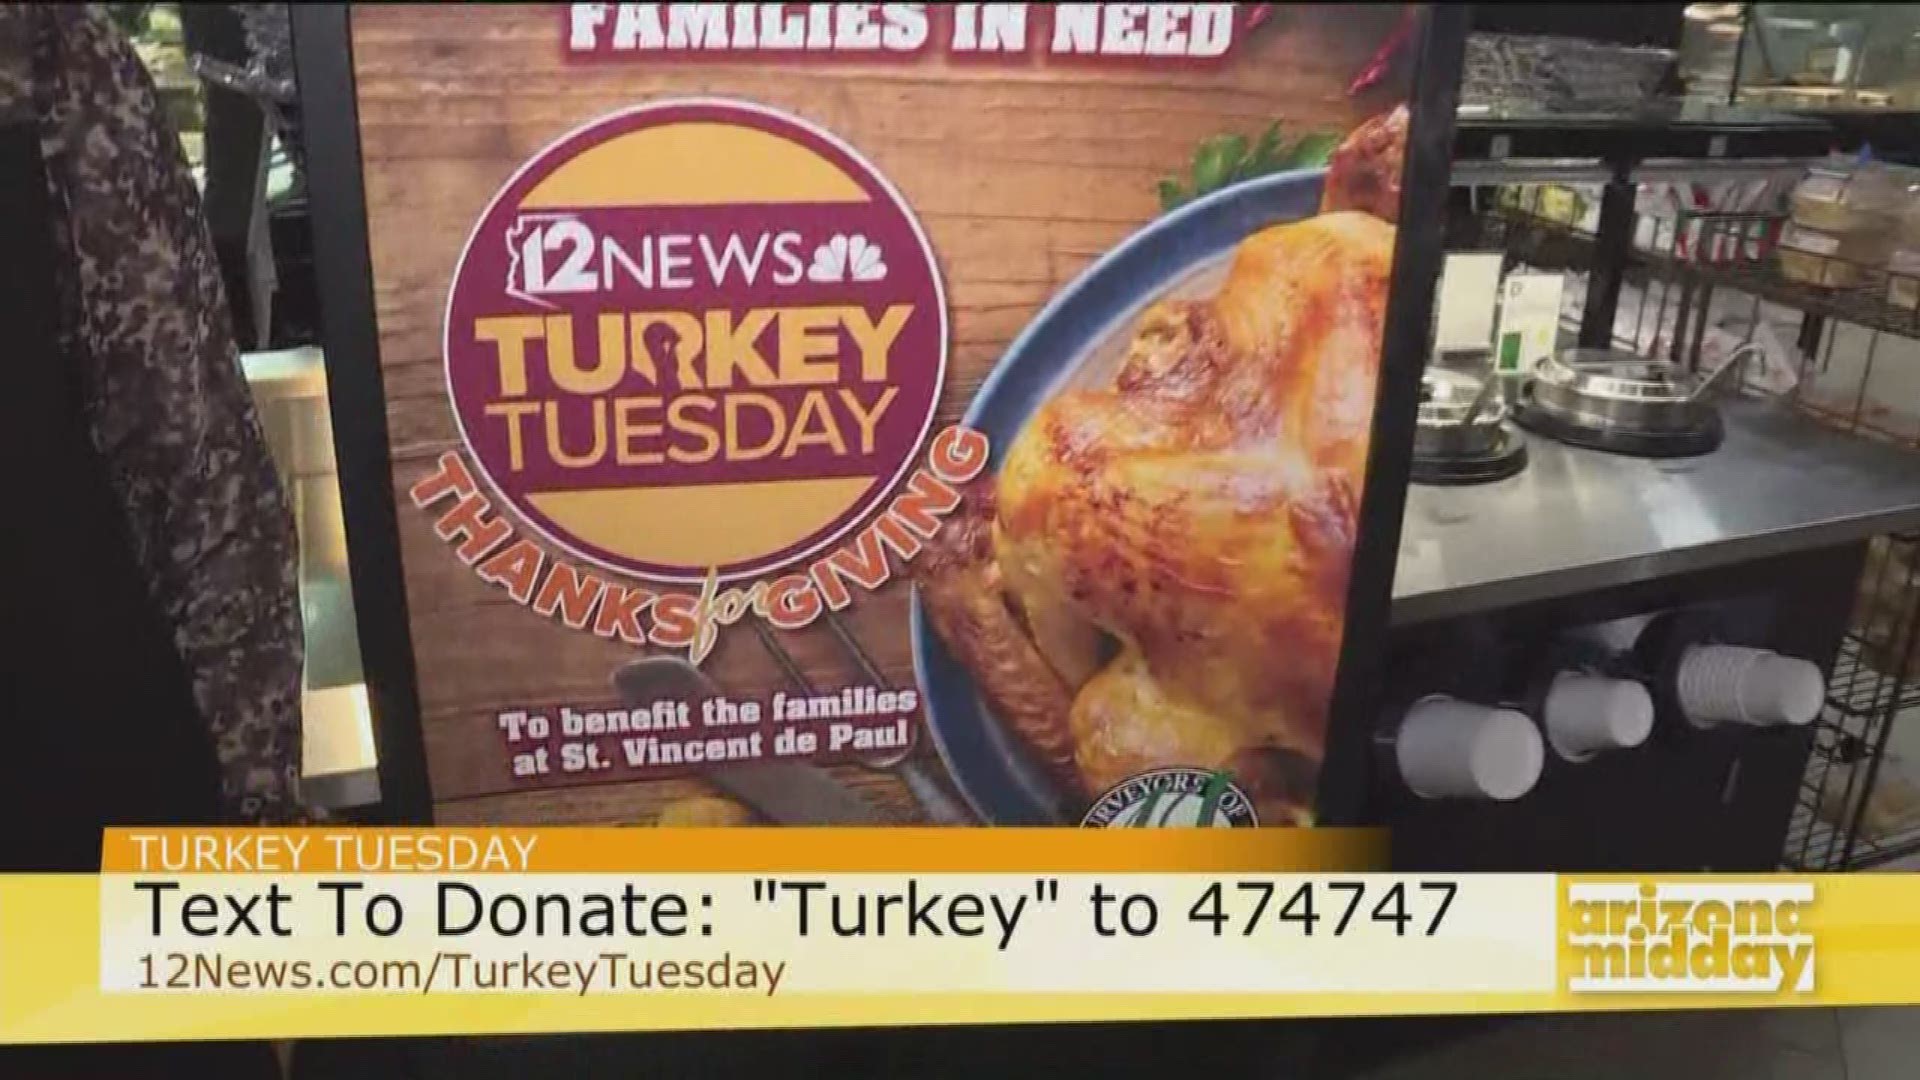 Turkey Tuesday is in it's 26th year! The turkey drive benefits St. Vincent De Paul.